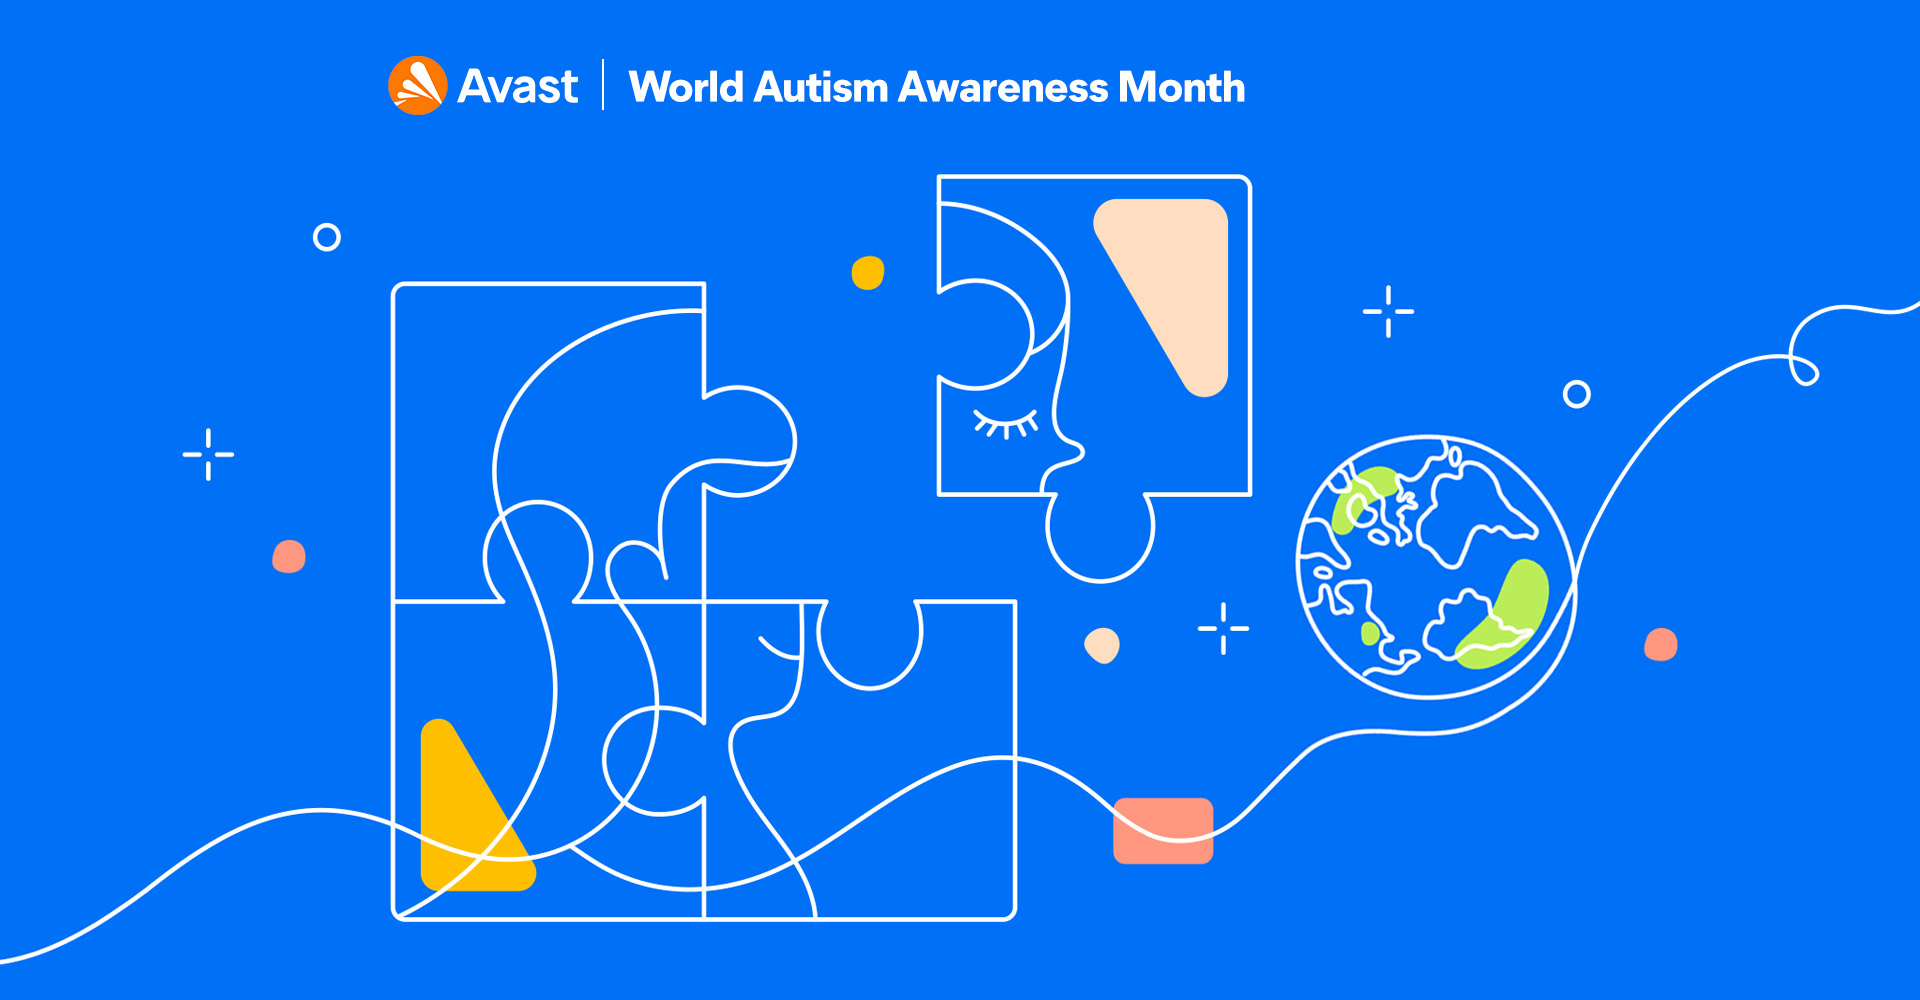  Celebrating World Autism Awareness Month with educational activities and our Autism@IT mentoring project 